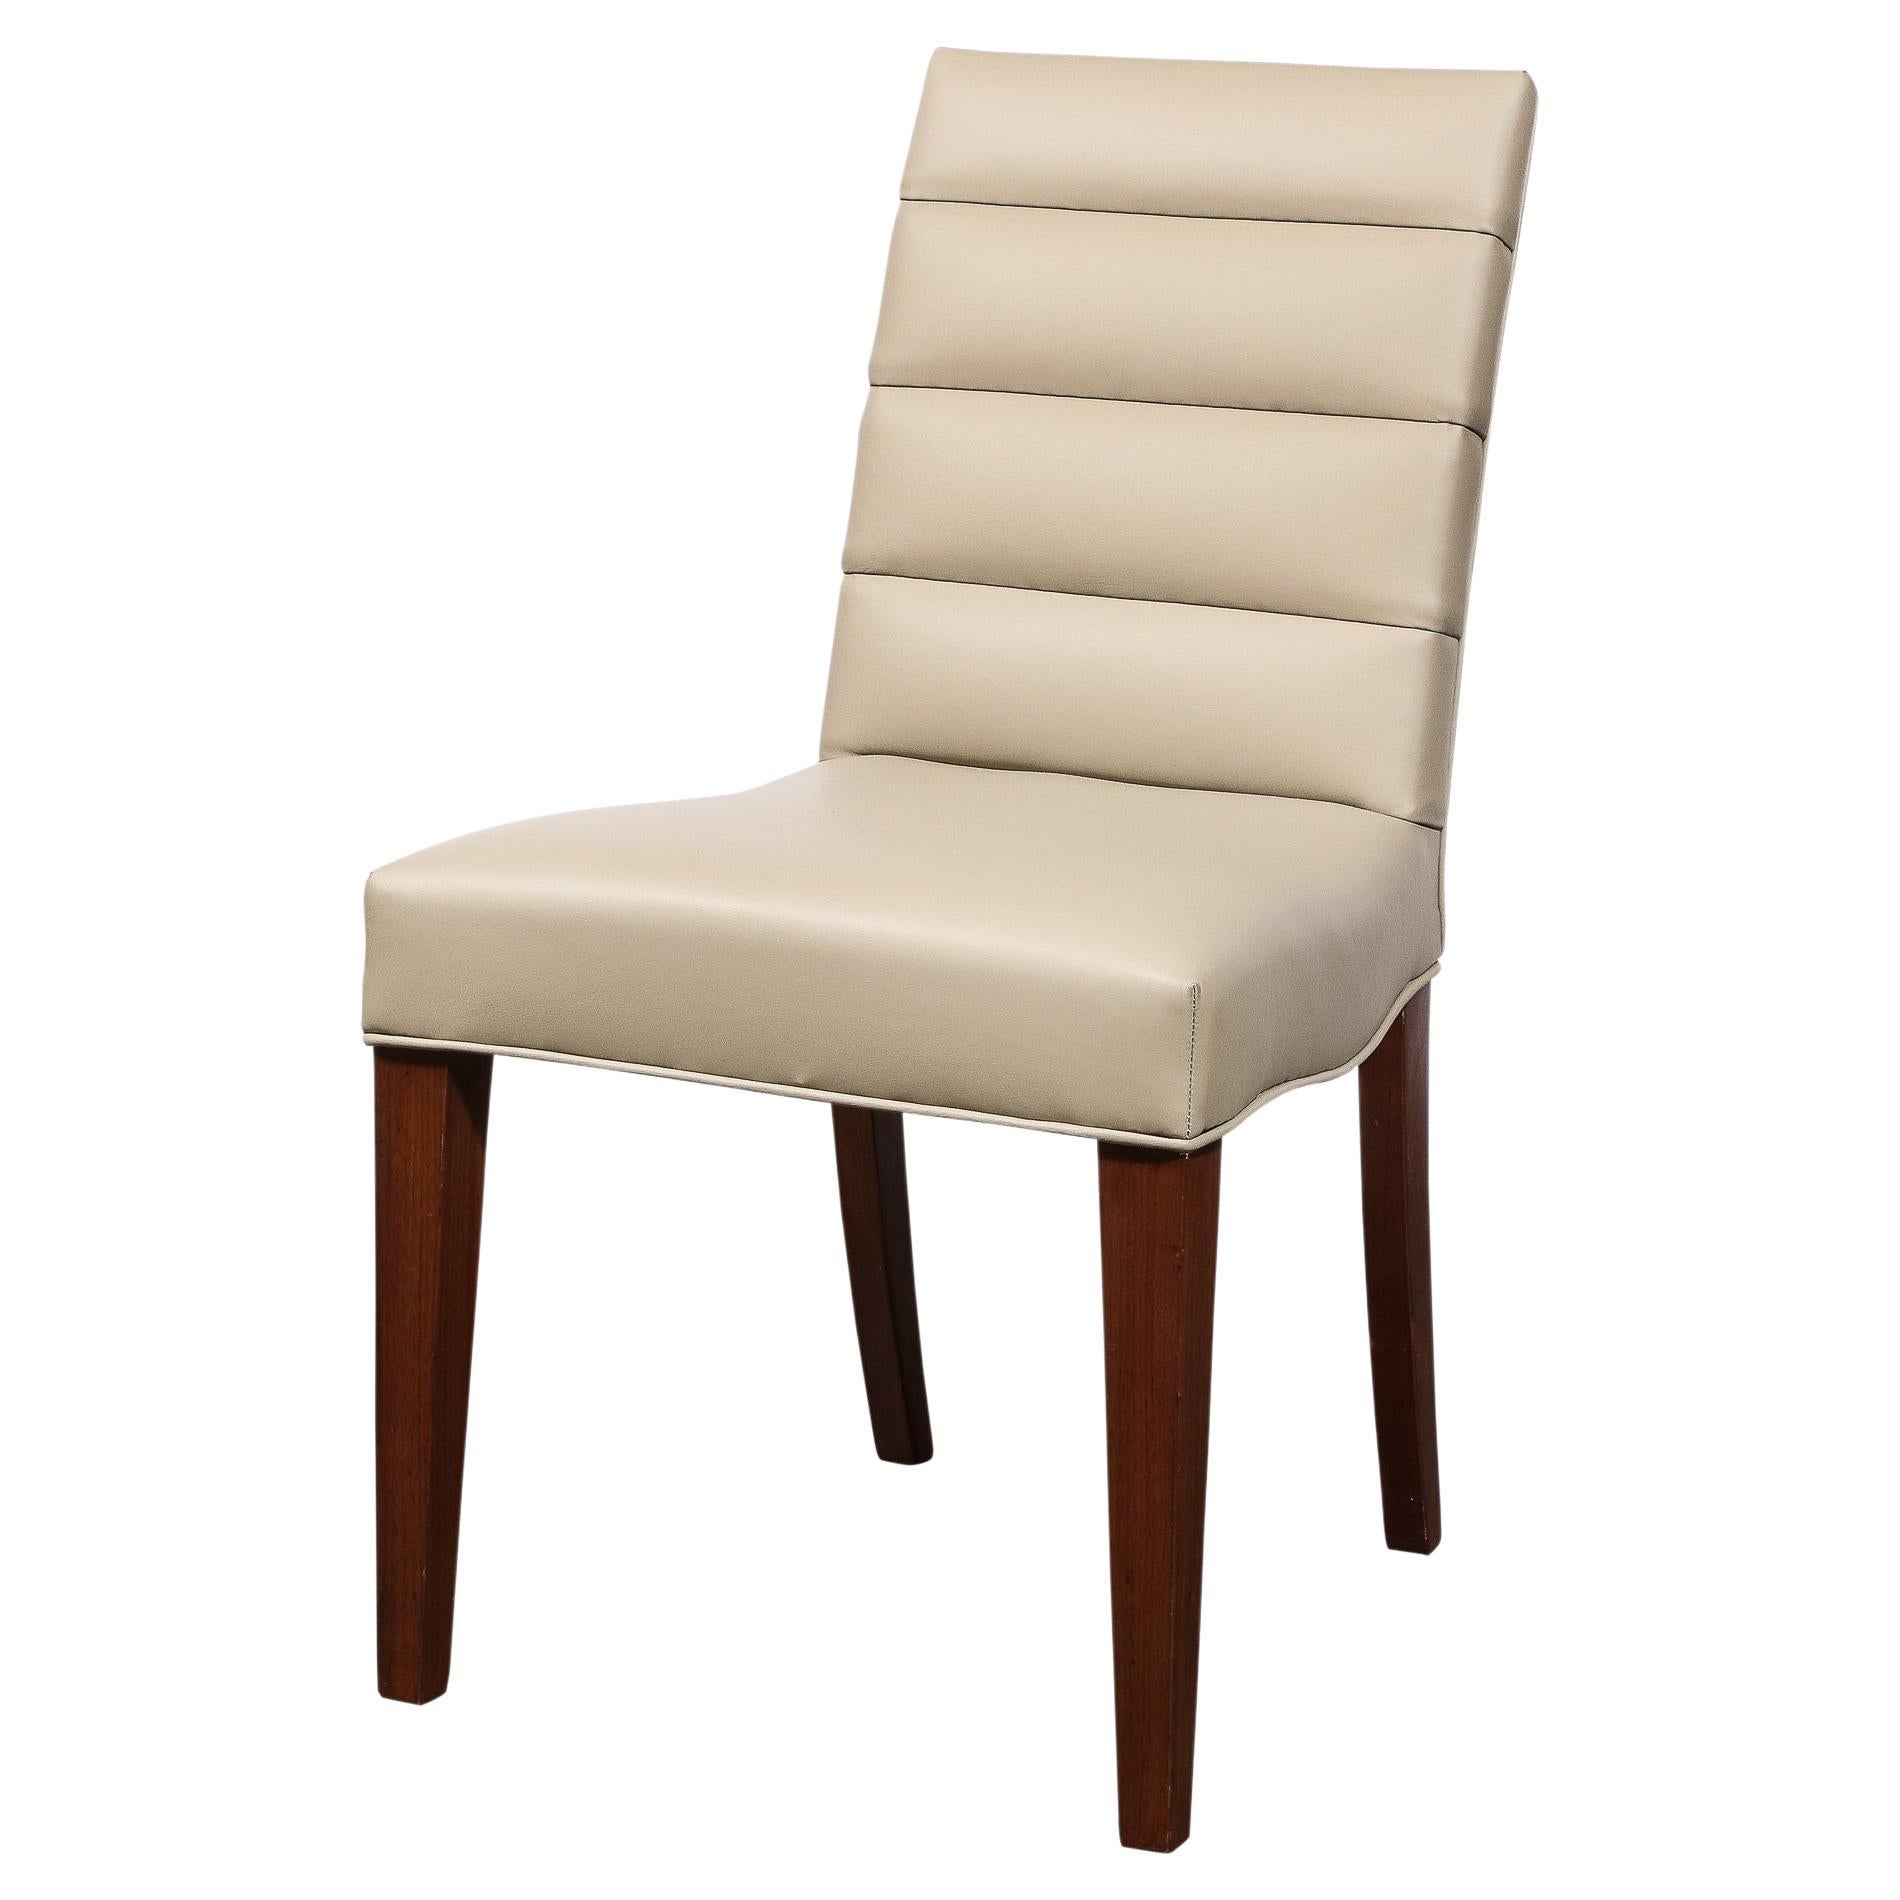 Art Deco Gilbert Rohde Chair in Holly Hunt Leather w/ Tufted Back & Walnut Legs For Sale